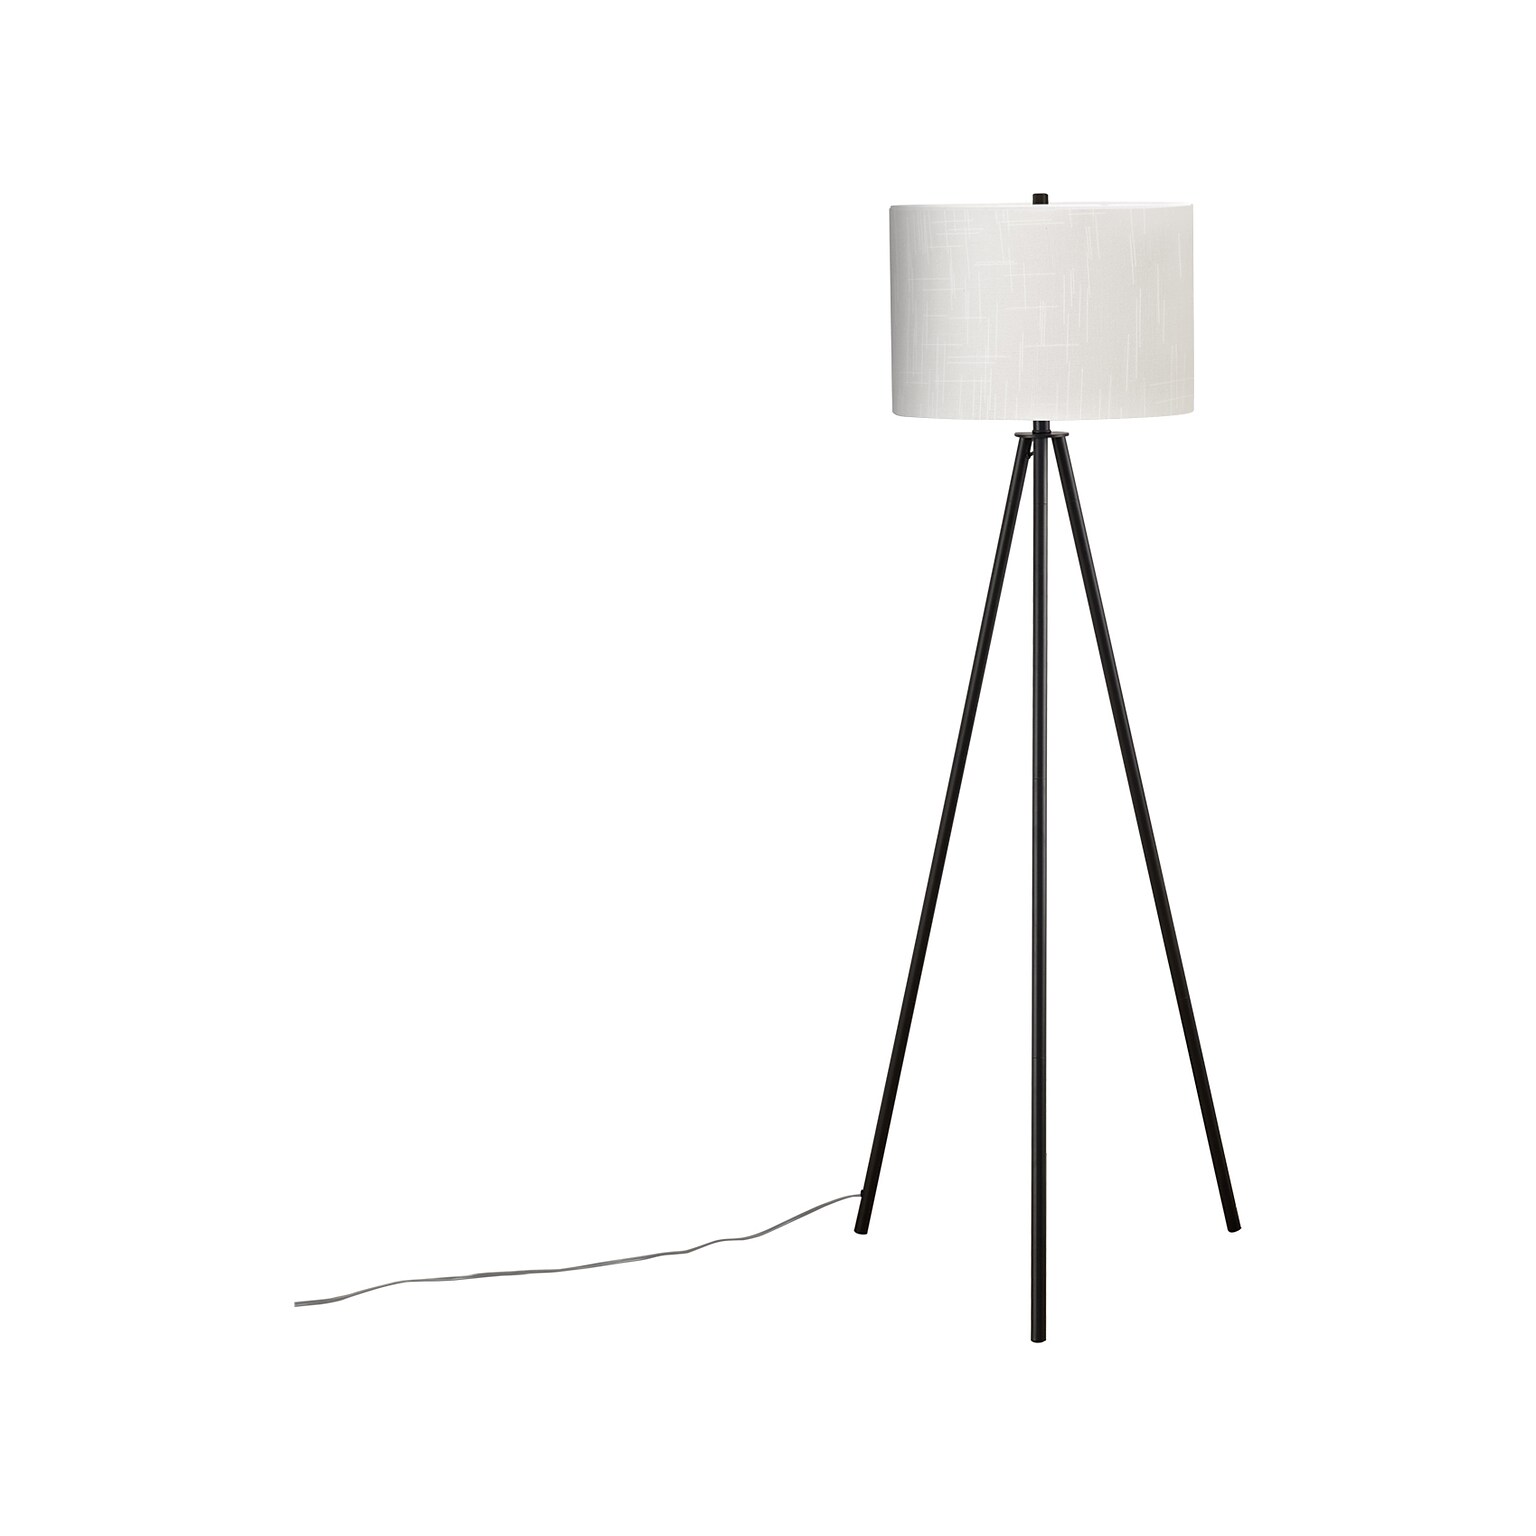 Monarch Specialties Inc. 62.75 Matte Black Floor Lamp with Ivory Drum Shade (I 9735)